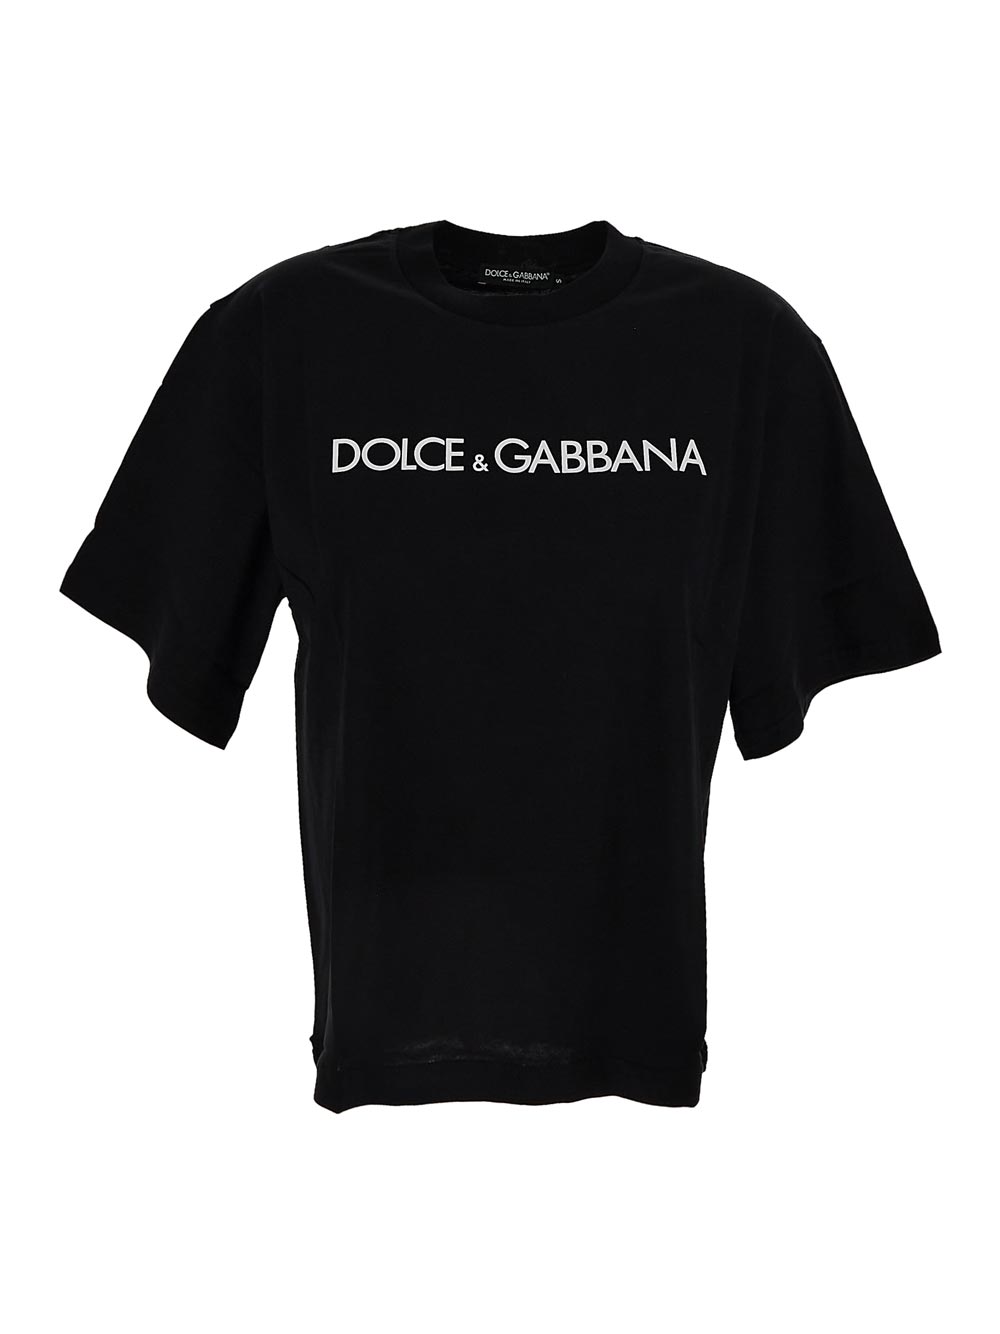 Dolce & Gabbana Short-Sleeved Cotton T-Shirt With Dolce&Gabbana Lettering